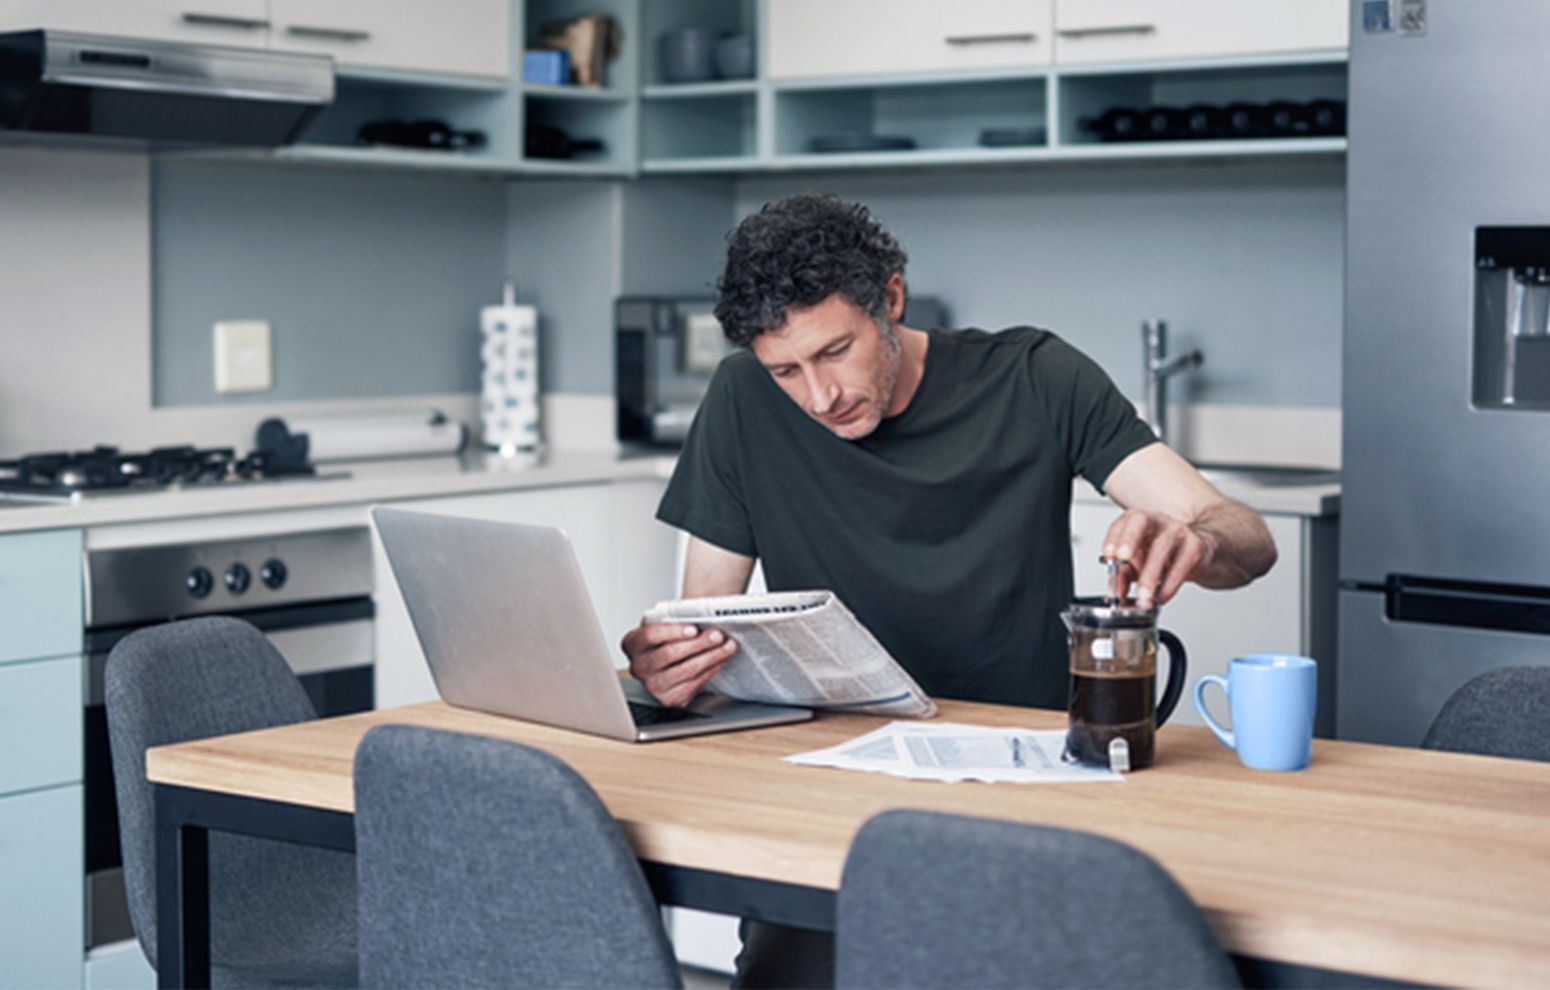 Man reads newspaper while brewing coffee at dining table